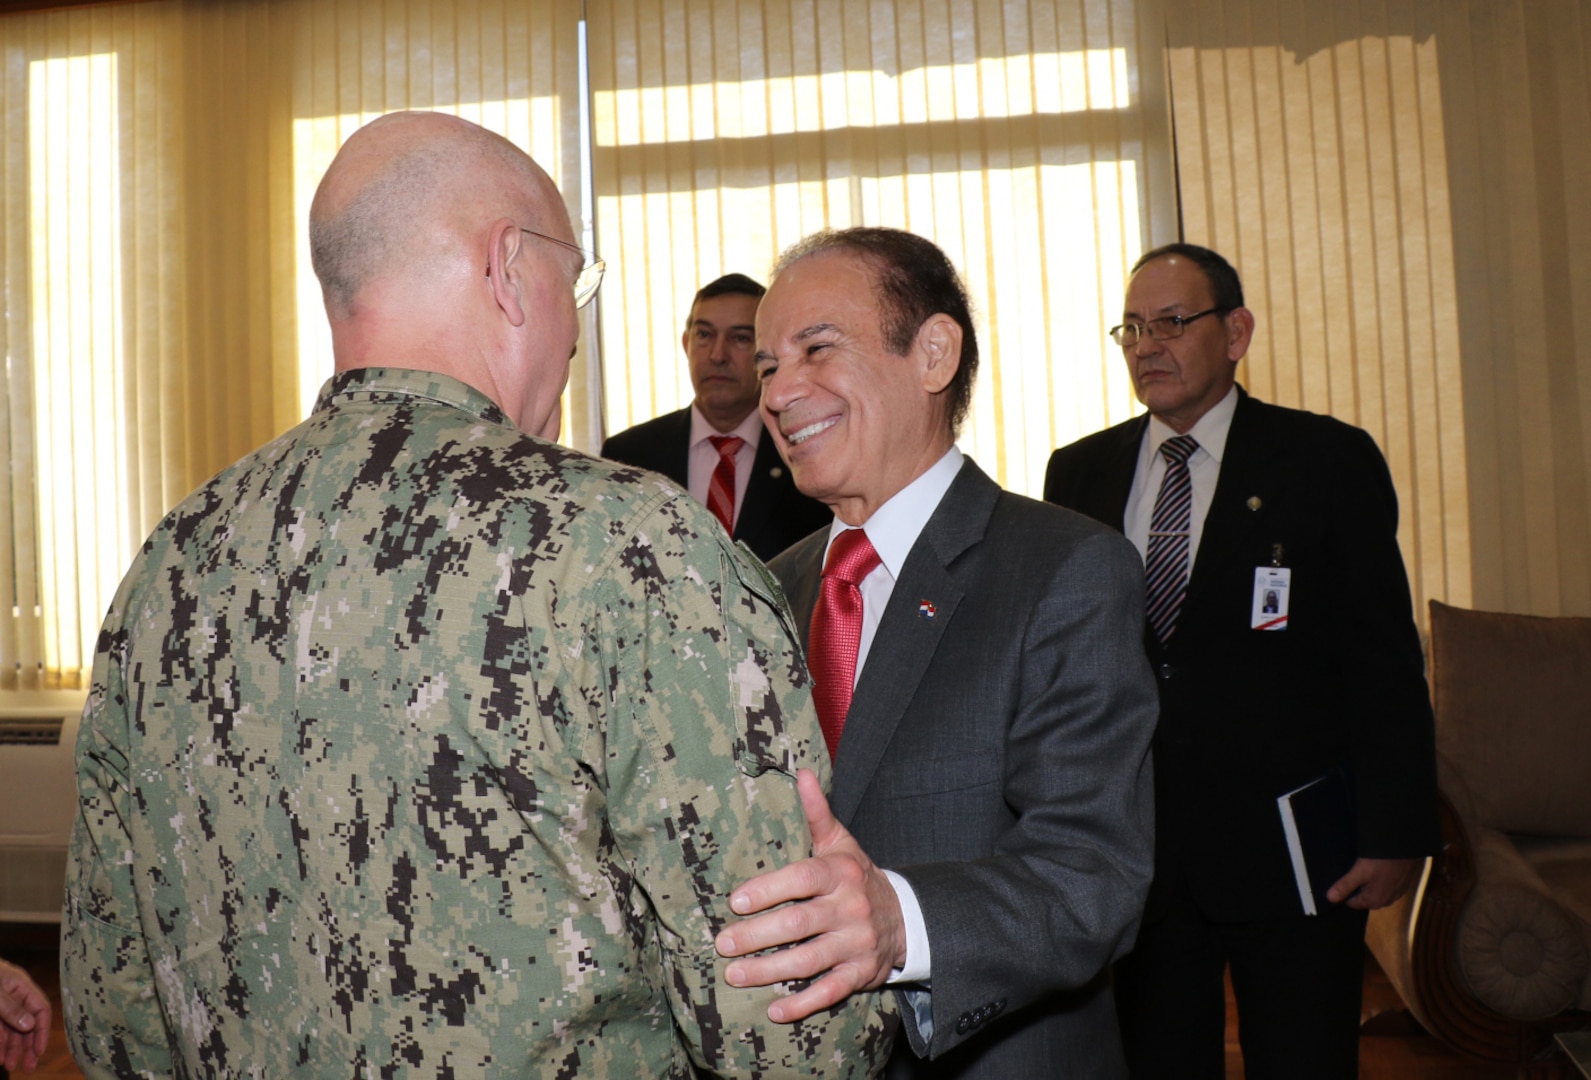 ASUNCIÓN, Paraguay (July 27, 2017) -- U.S. Navy Adm. Kurt W. Tidd, commander of U.S. Southern Command, and Paraguayan Minister of Defense Diogenes Martinez meet at the Ministry of Defense in Asunción to discuss defense cooperation efforts. Tidd is in Paraguay to meet the nation's leaders and to engage with senior regional security officials during the annual Fuerzas Comando multinational special operations skills competition. (Photo by SOUTHCOM Public Affairs)